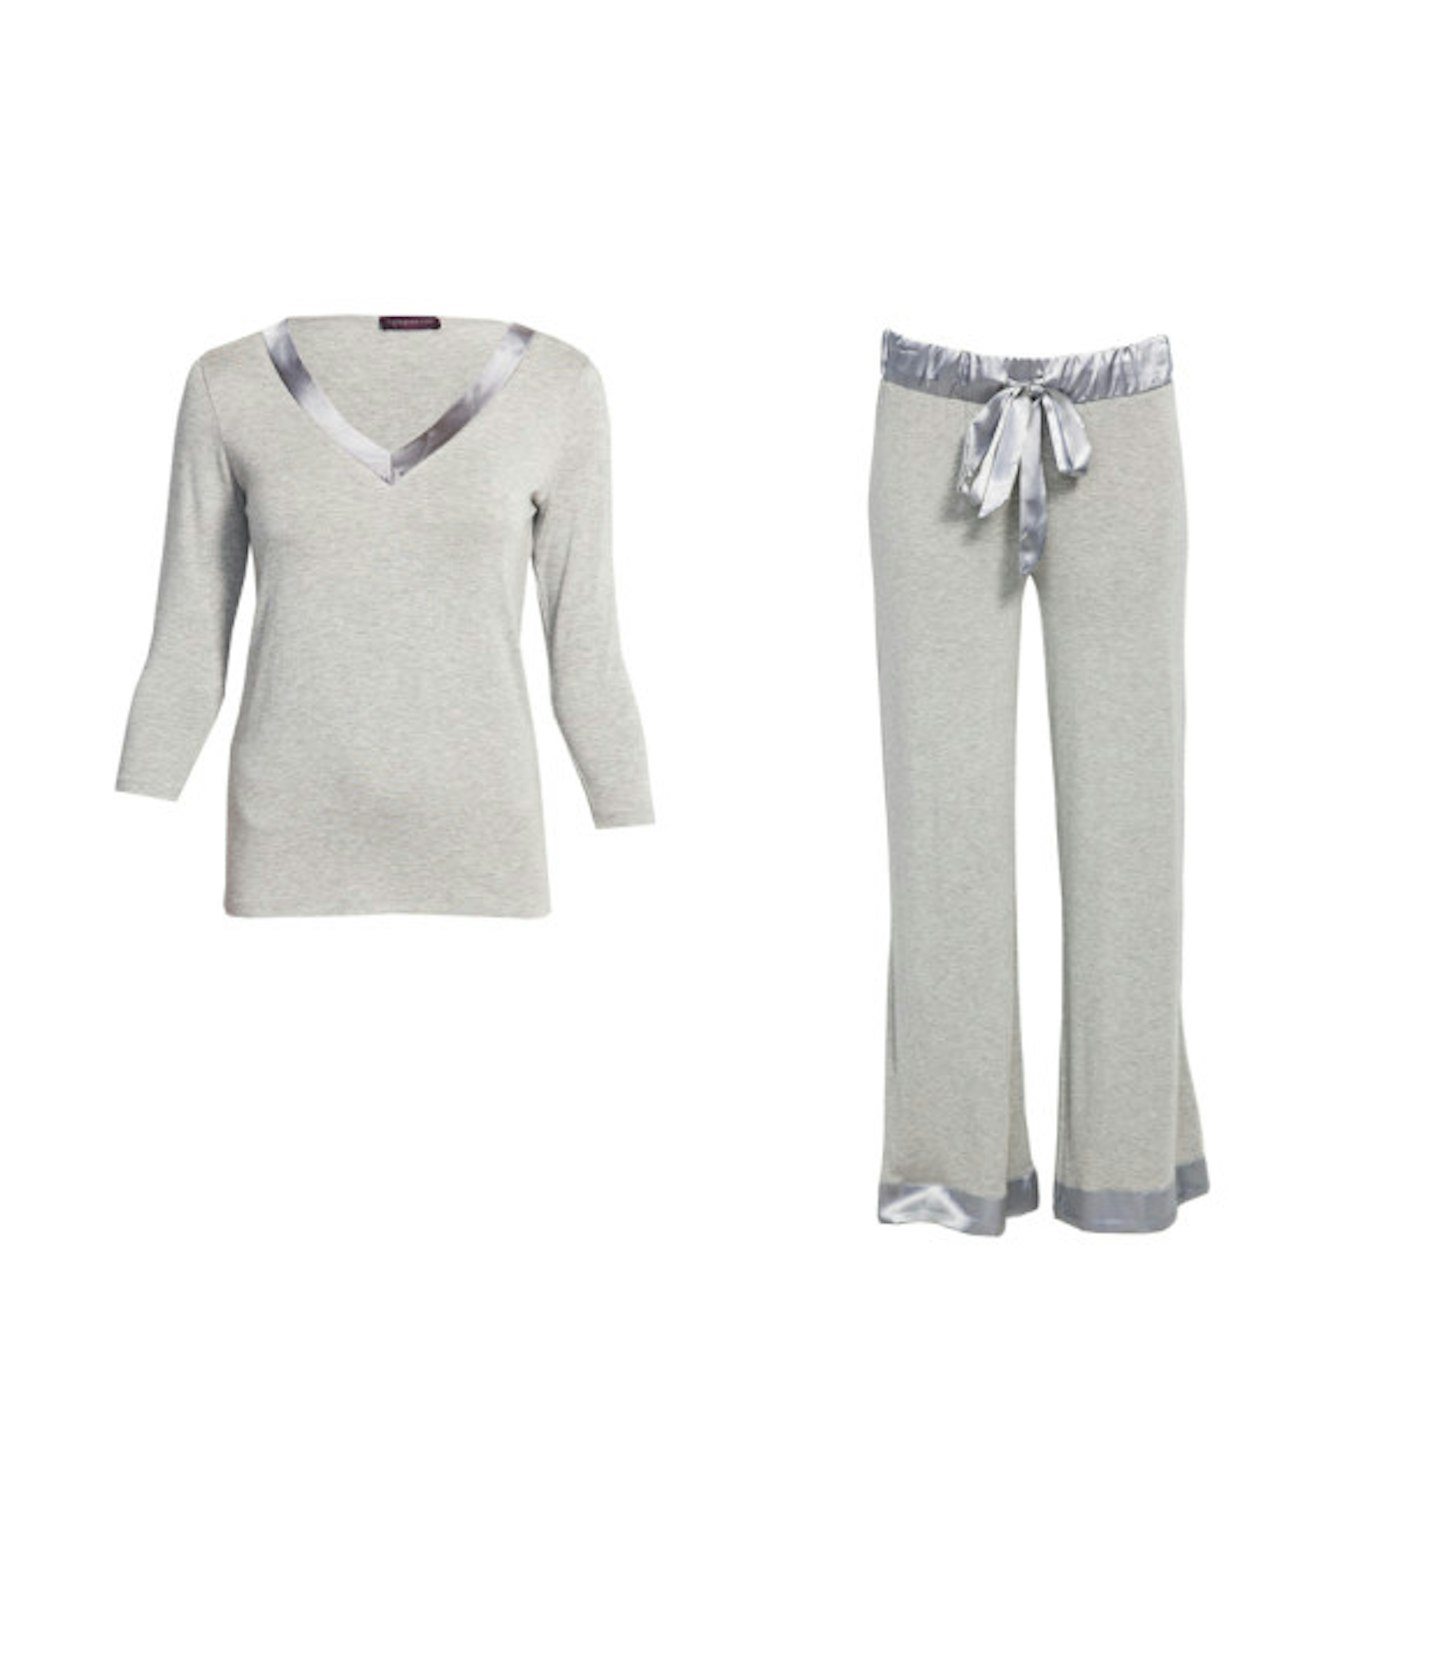 fifty-shades-of-grey-shopping-figleaves-pyjamas